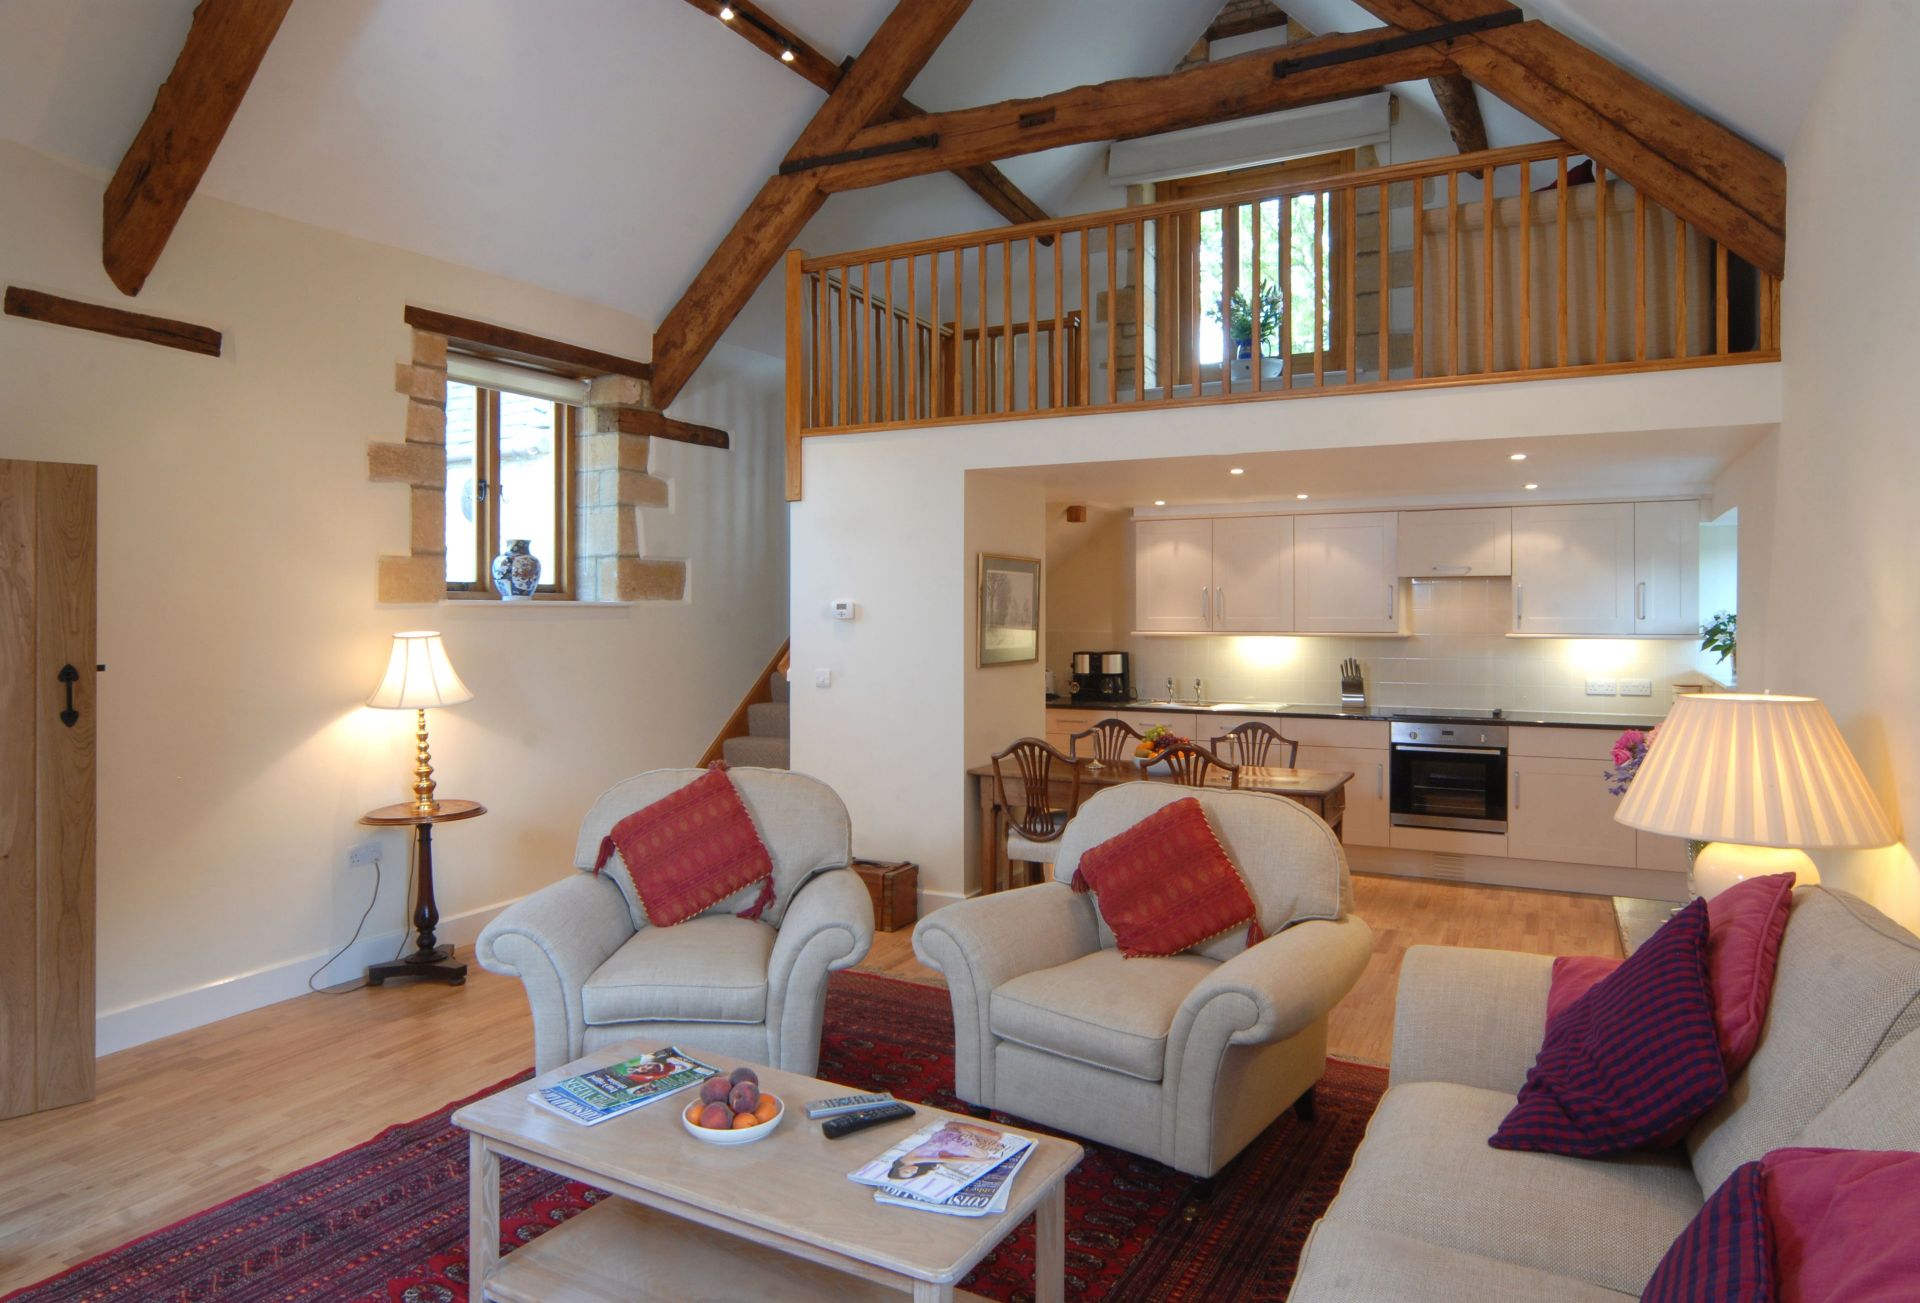 More information about Nellie's Barn - ideal for a family holiday